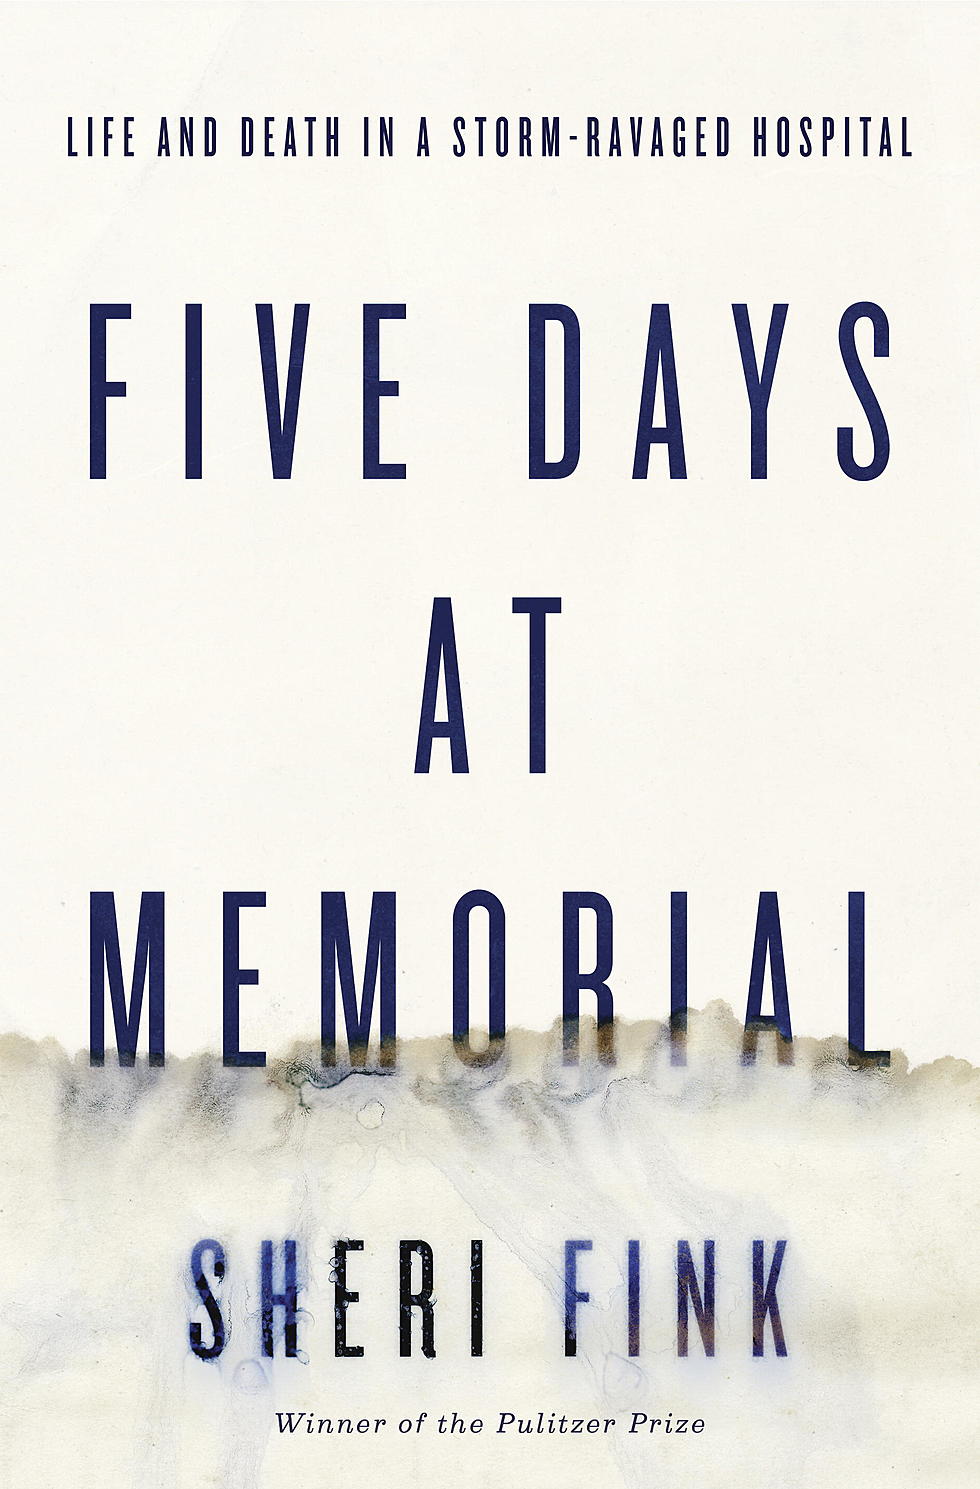 A Big Chuck Book Review:  “Five Days at Memorial” Is Unforgettable!